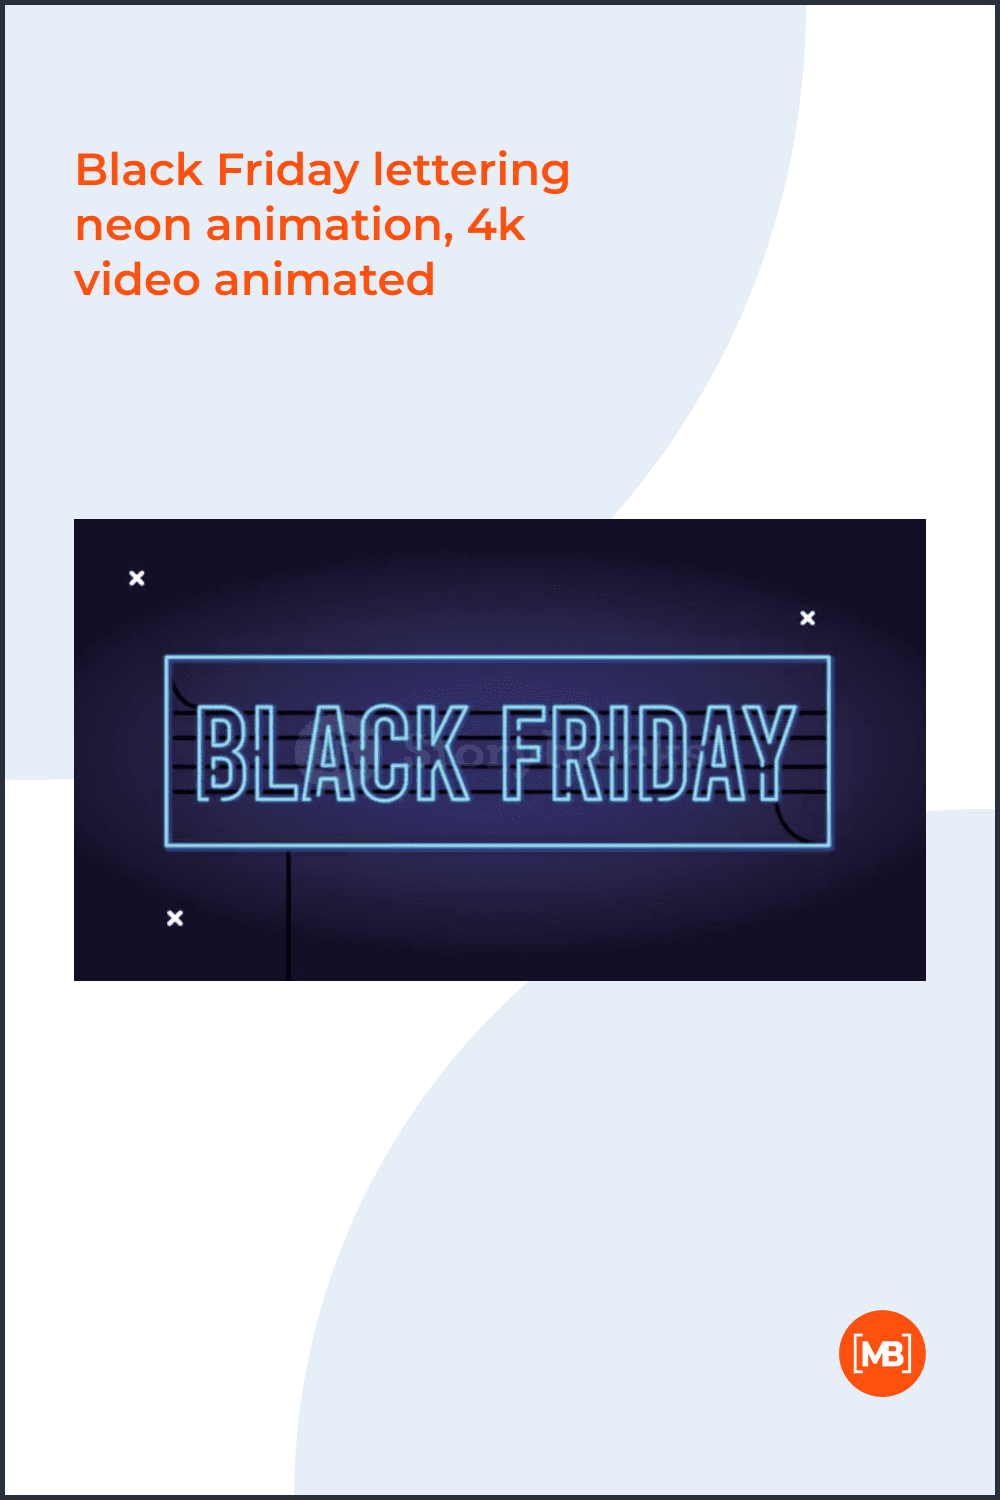 Black Friday lettering neon animation, 4k video animated.